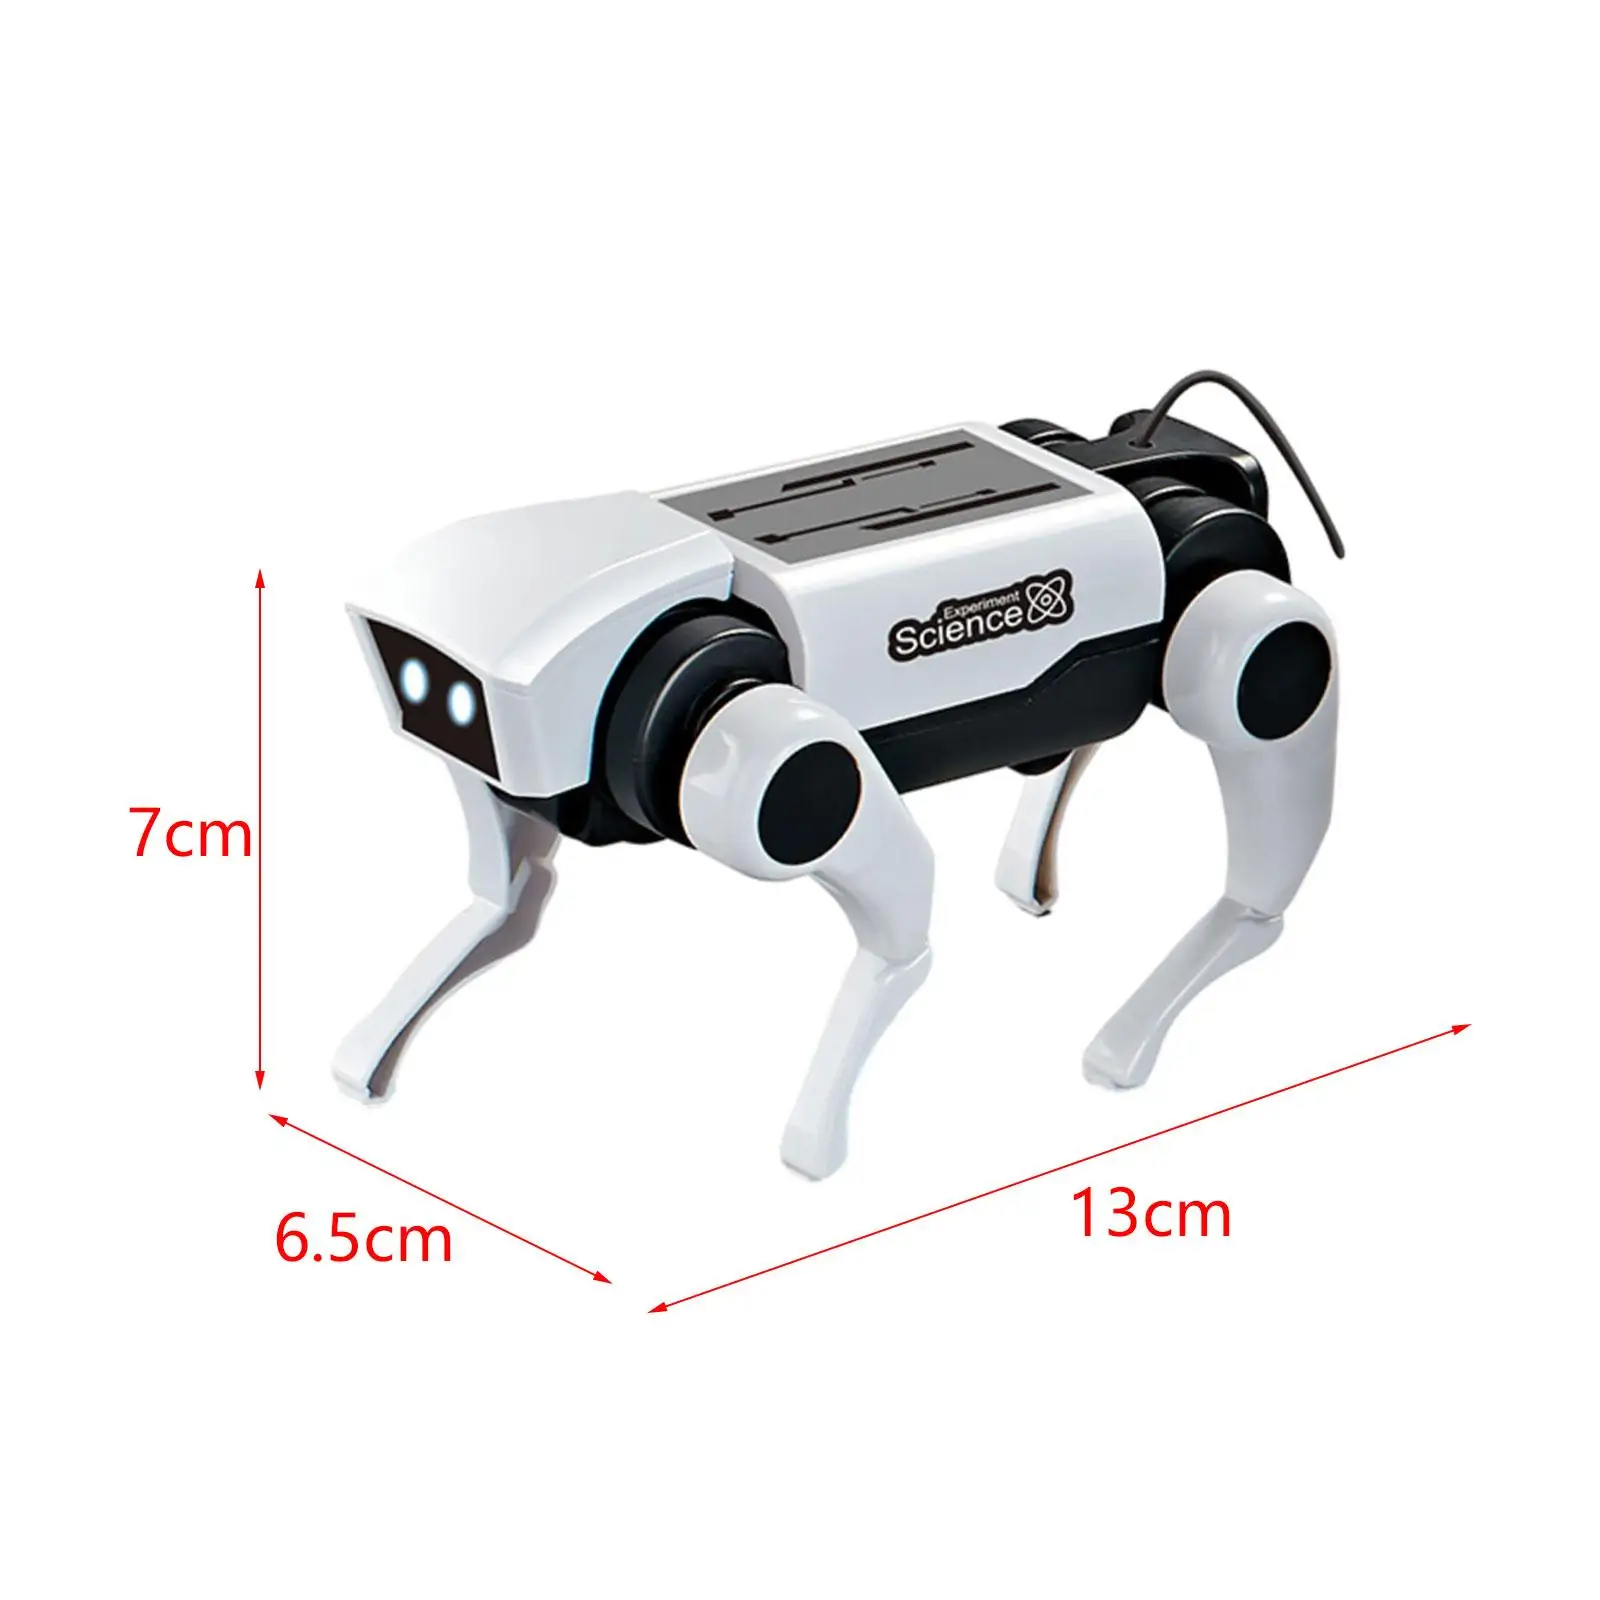 Electric Mechanical Dog Educational 3D Puzzle Assembly Remote Control Puppy Toy for Girls Boys Children Teens Birthday Gifts